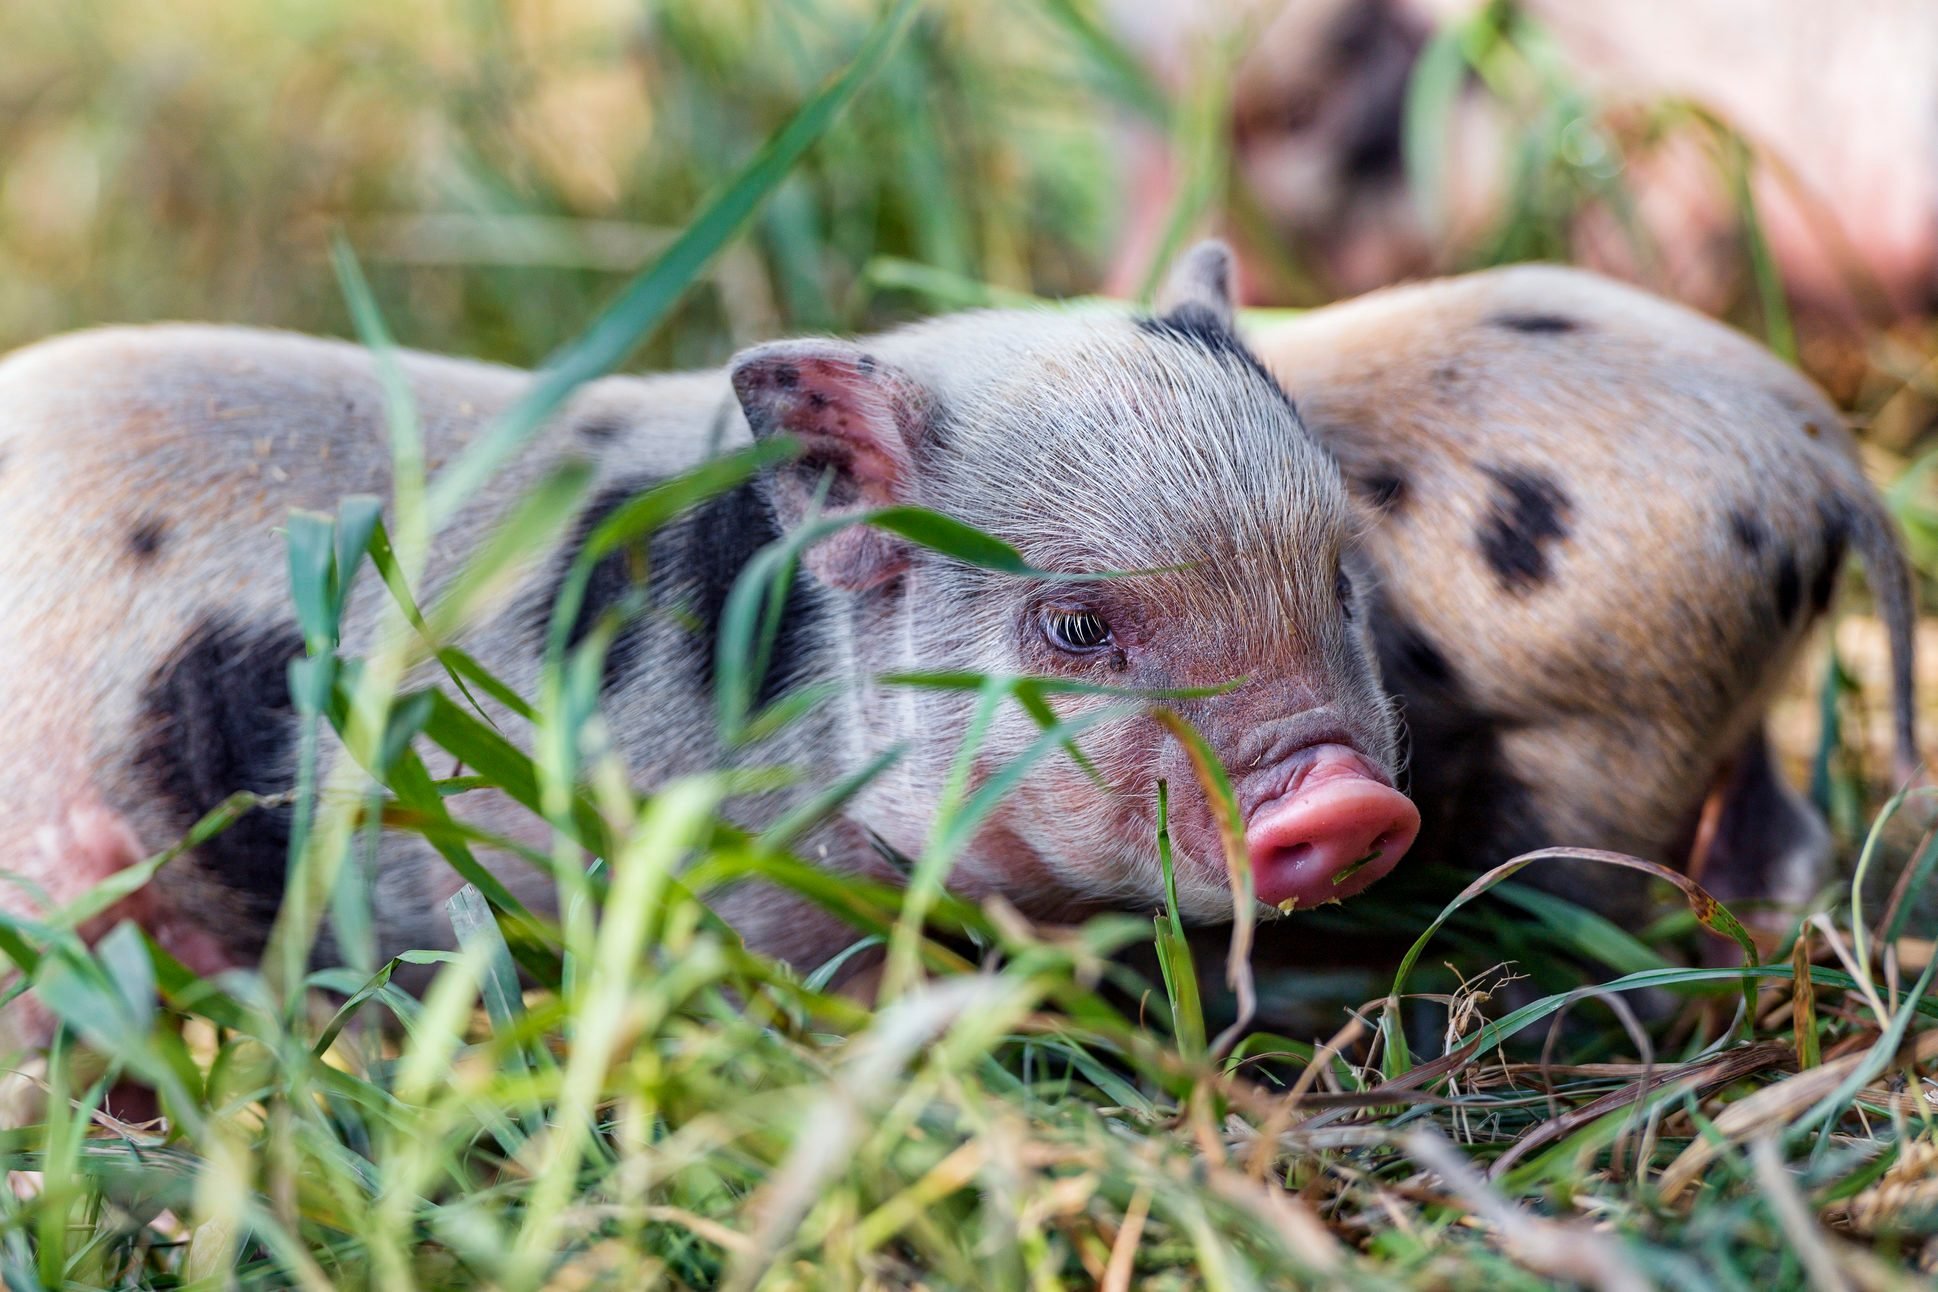 Two mini piglets in the grass